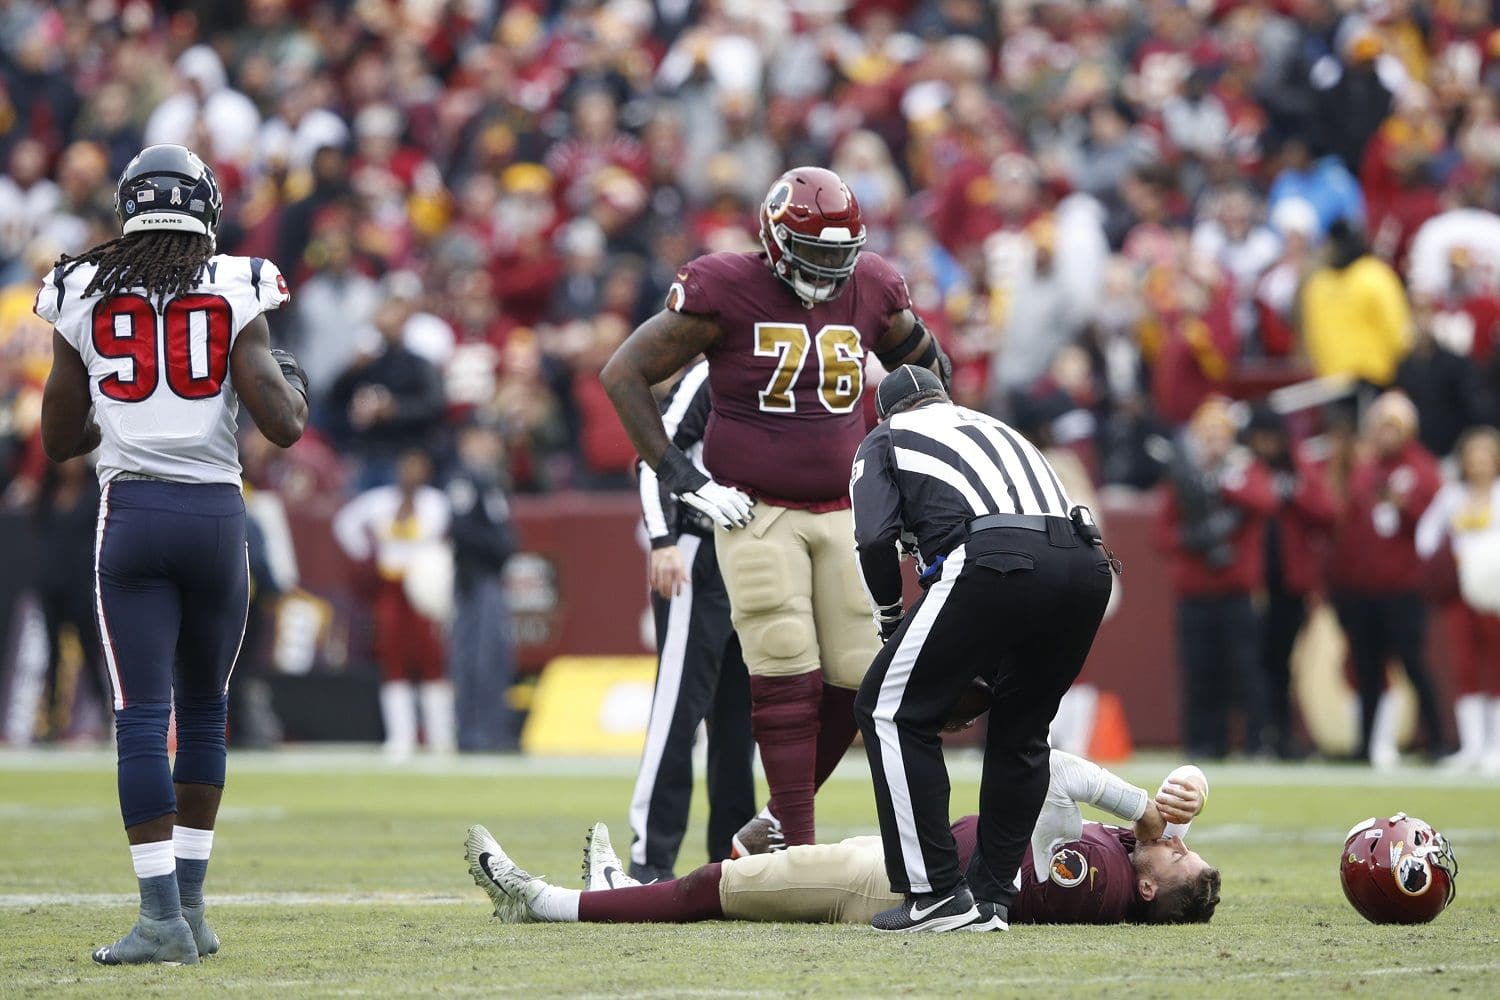 LANDOVER, MD - NOVEMBER 18: Alex Smith #11 of the Washington Redskins lays on the field after being sacked and injured by Kareem Jackson #25 of the Houston Texans in the third quarter of the game at FedExField on November 18, 2018 in Landover, Maryland. (Photo by Joe Robbins/Getty Images)